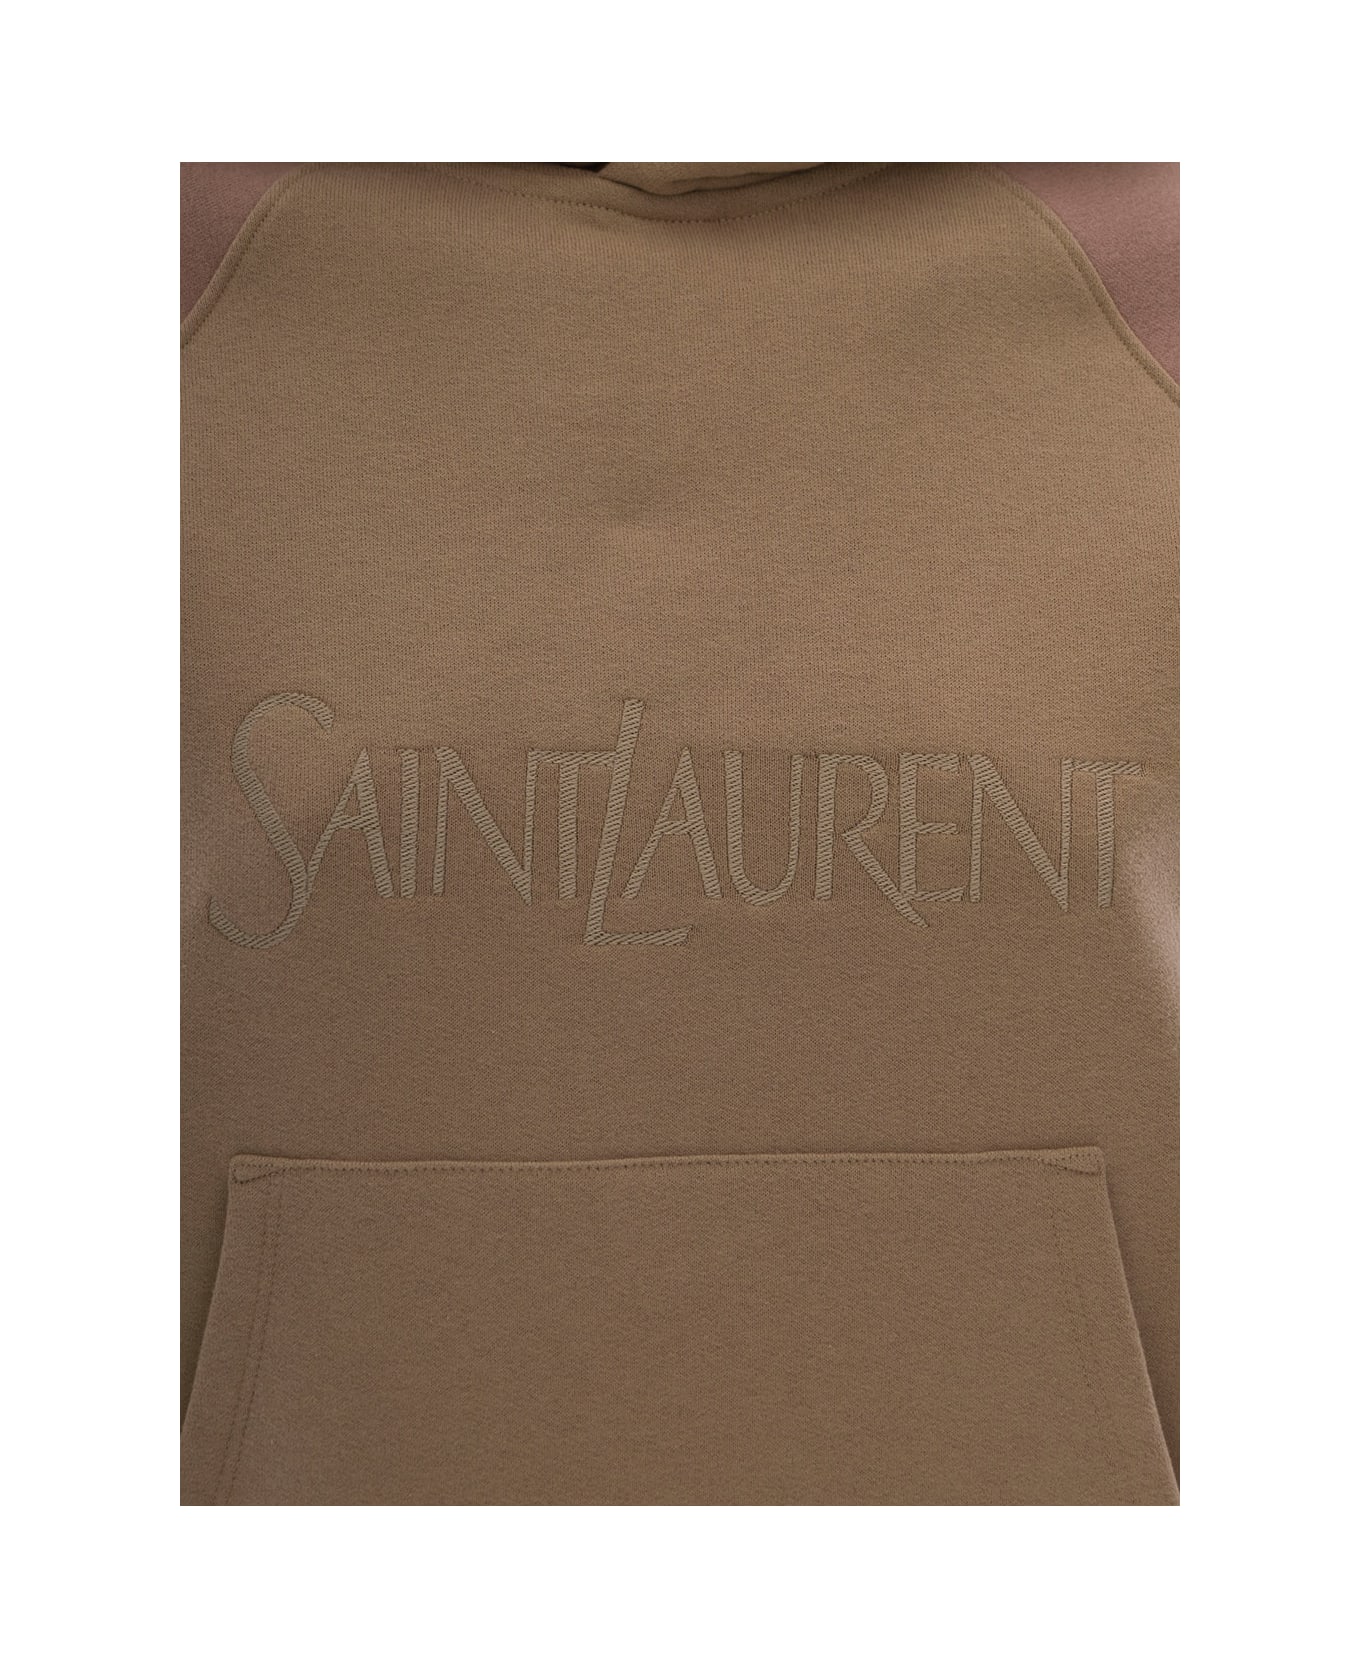 Saint Laurent Sweatshirt With Hood And Embroidered Logo - Nude & Neutrals